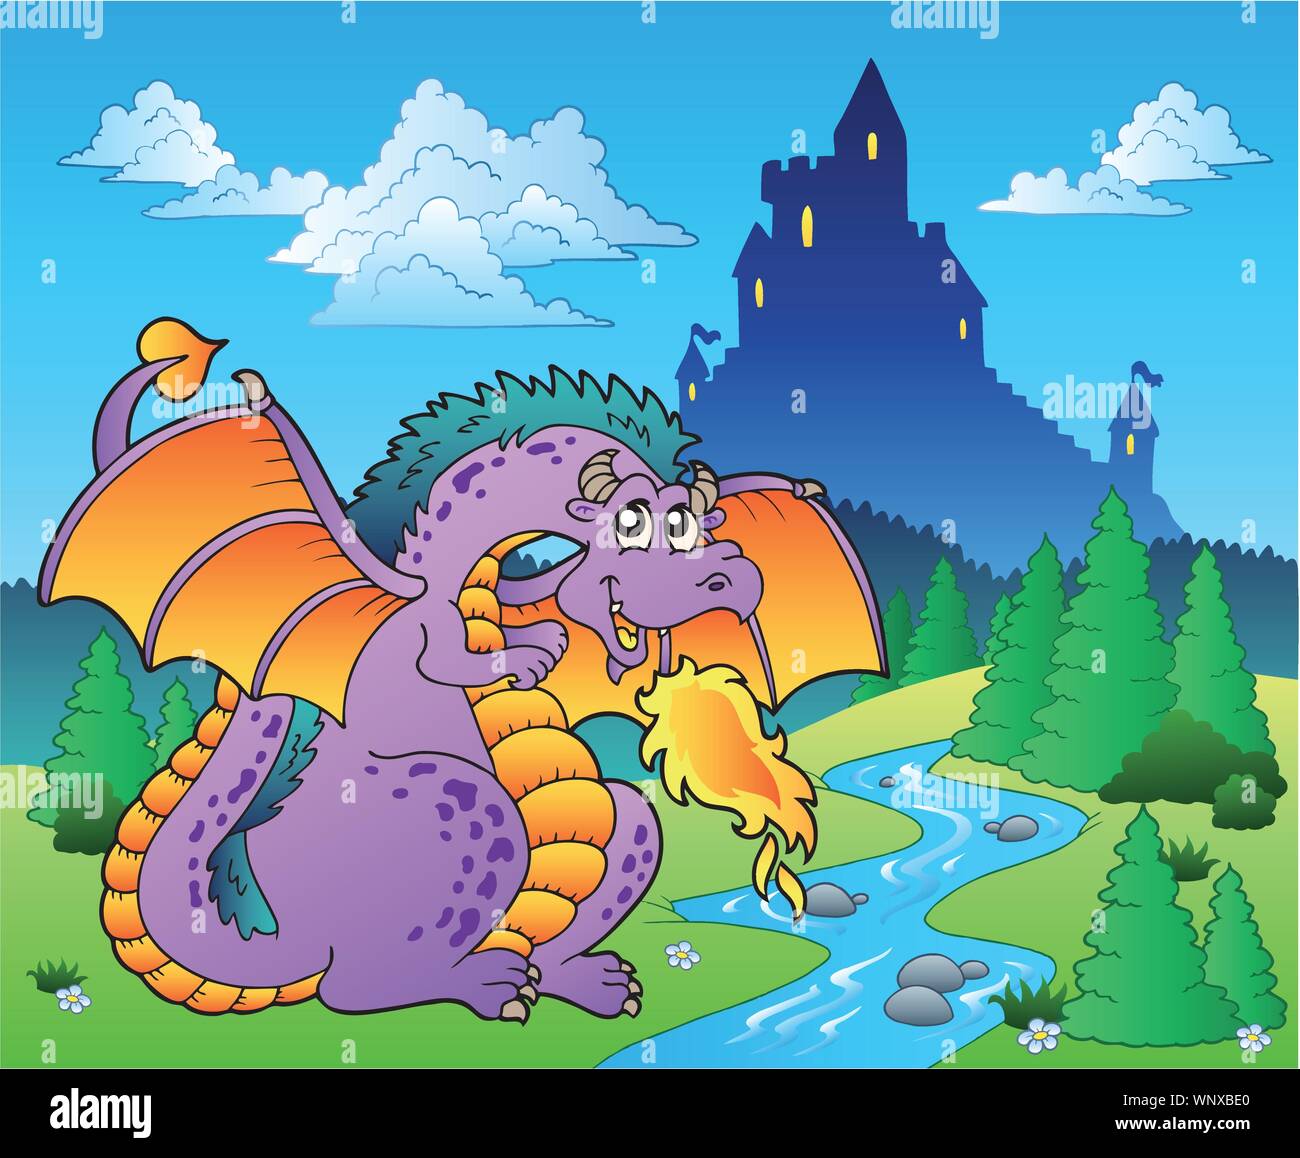 Fairy tale image with dragon 2 Stock Vector